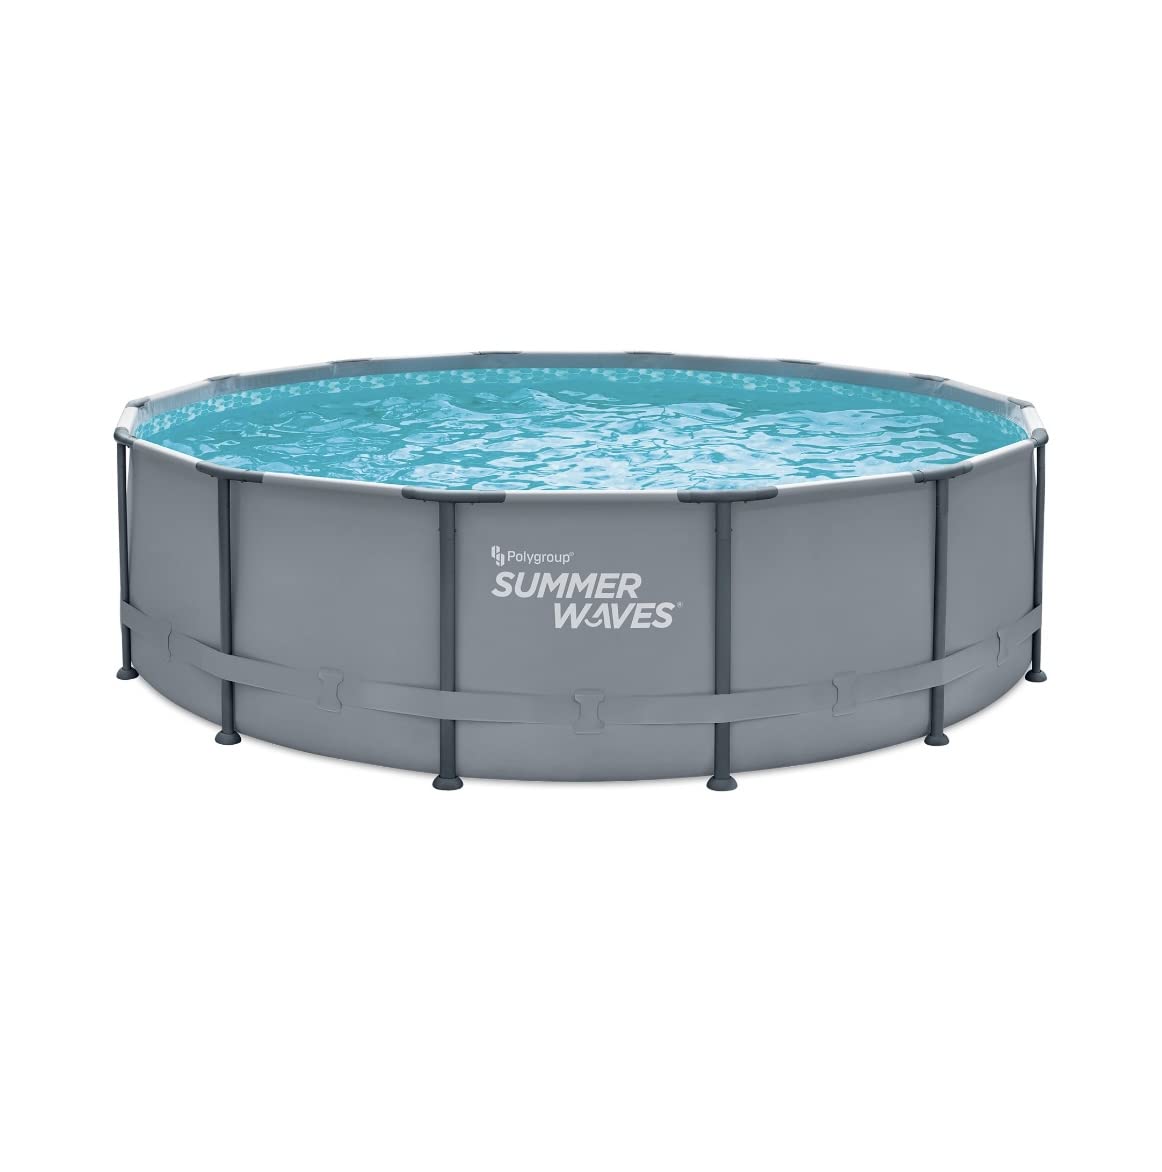 SUMMER WAVES 14ft Elite Frame Grey Pool with Filter Pump, Cover, and Ladder